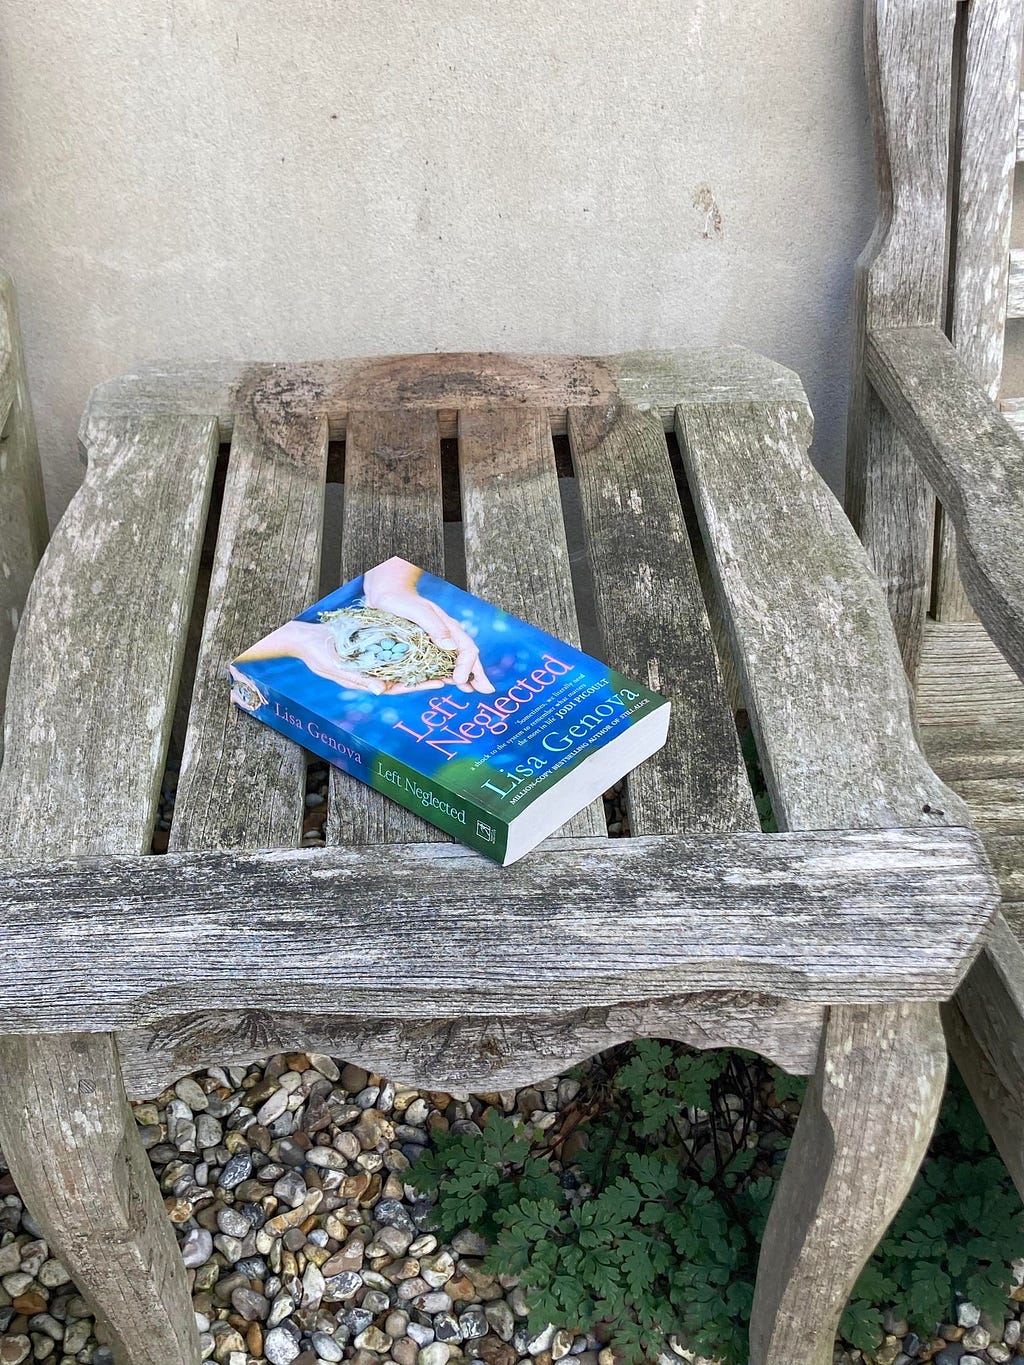 A photograph of the book ‘Left Neglected’ on a garden table